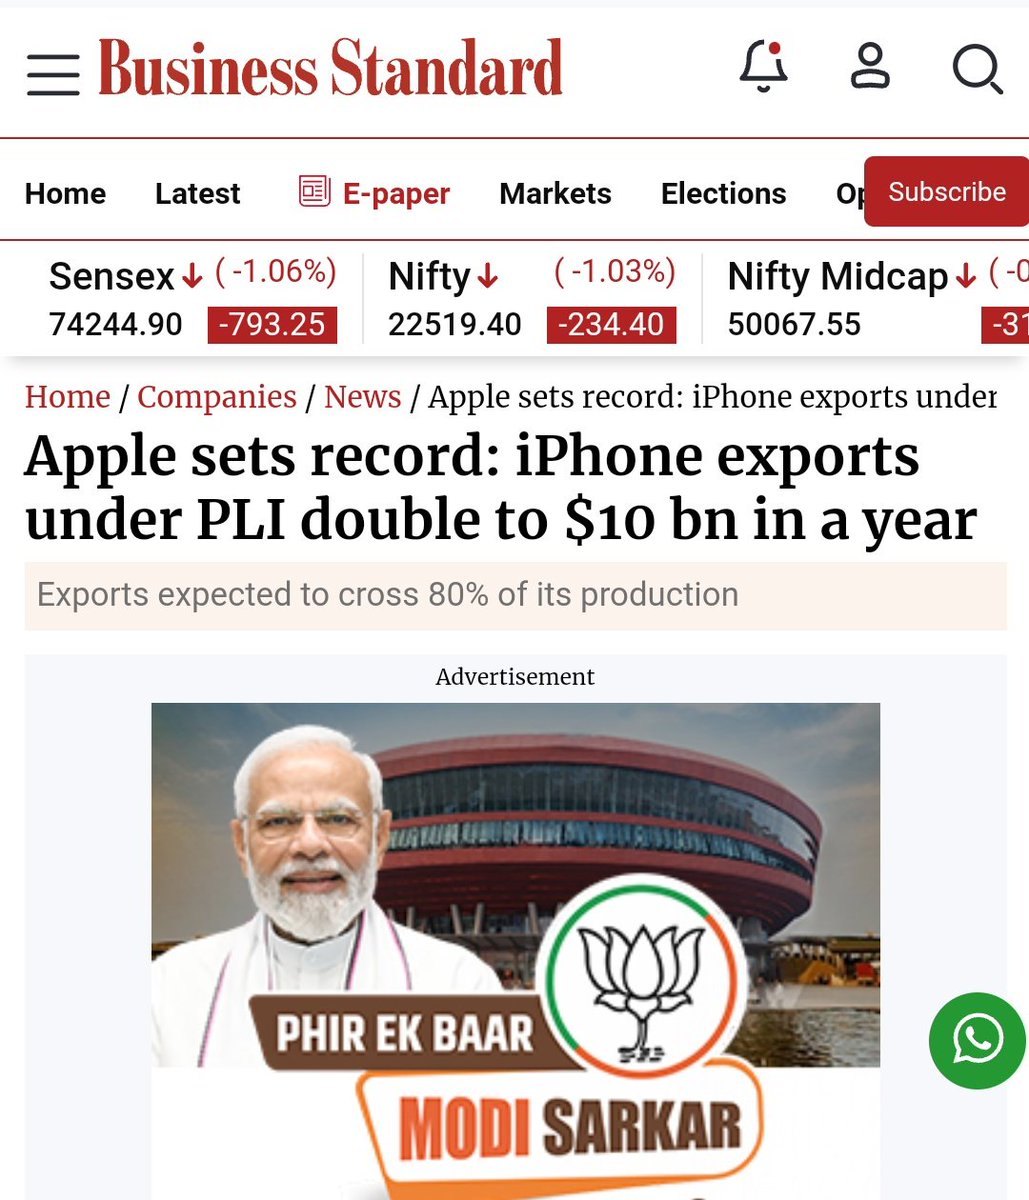 This was the target for FY 25!!!
This happens to be the largest ever export of a single branded product from India by any co. #Apple #india